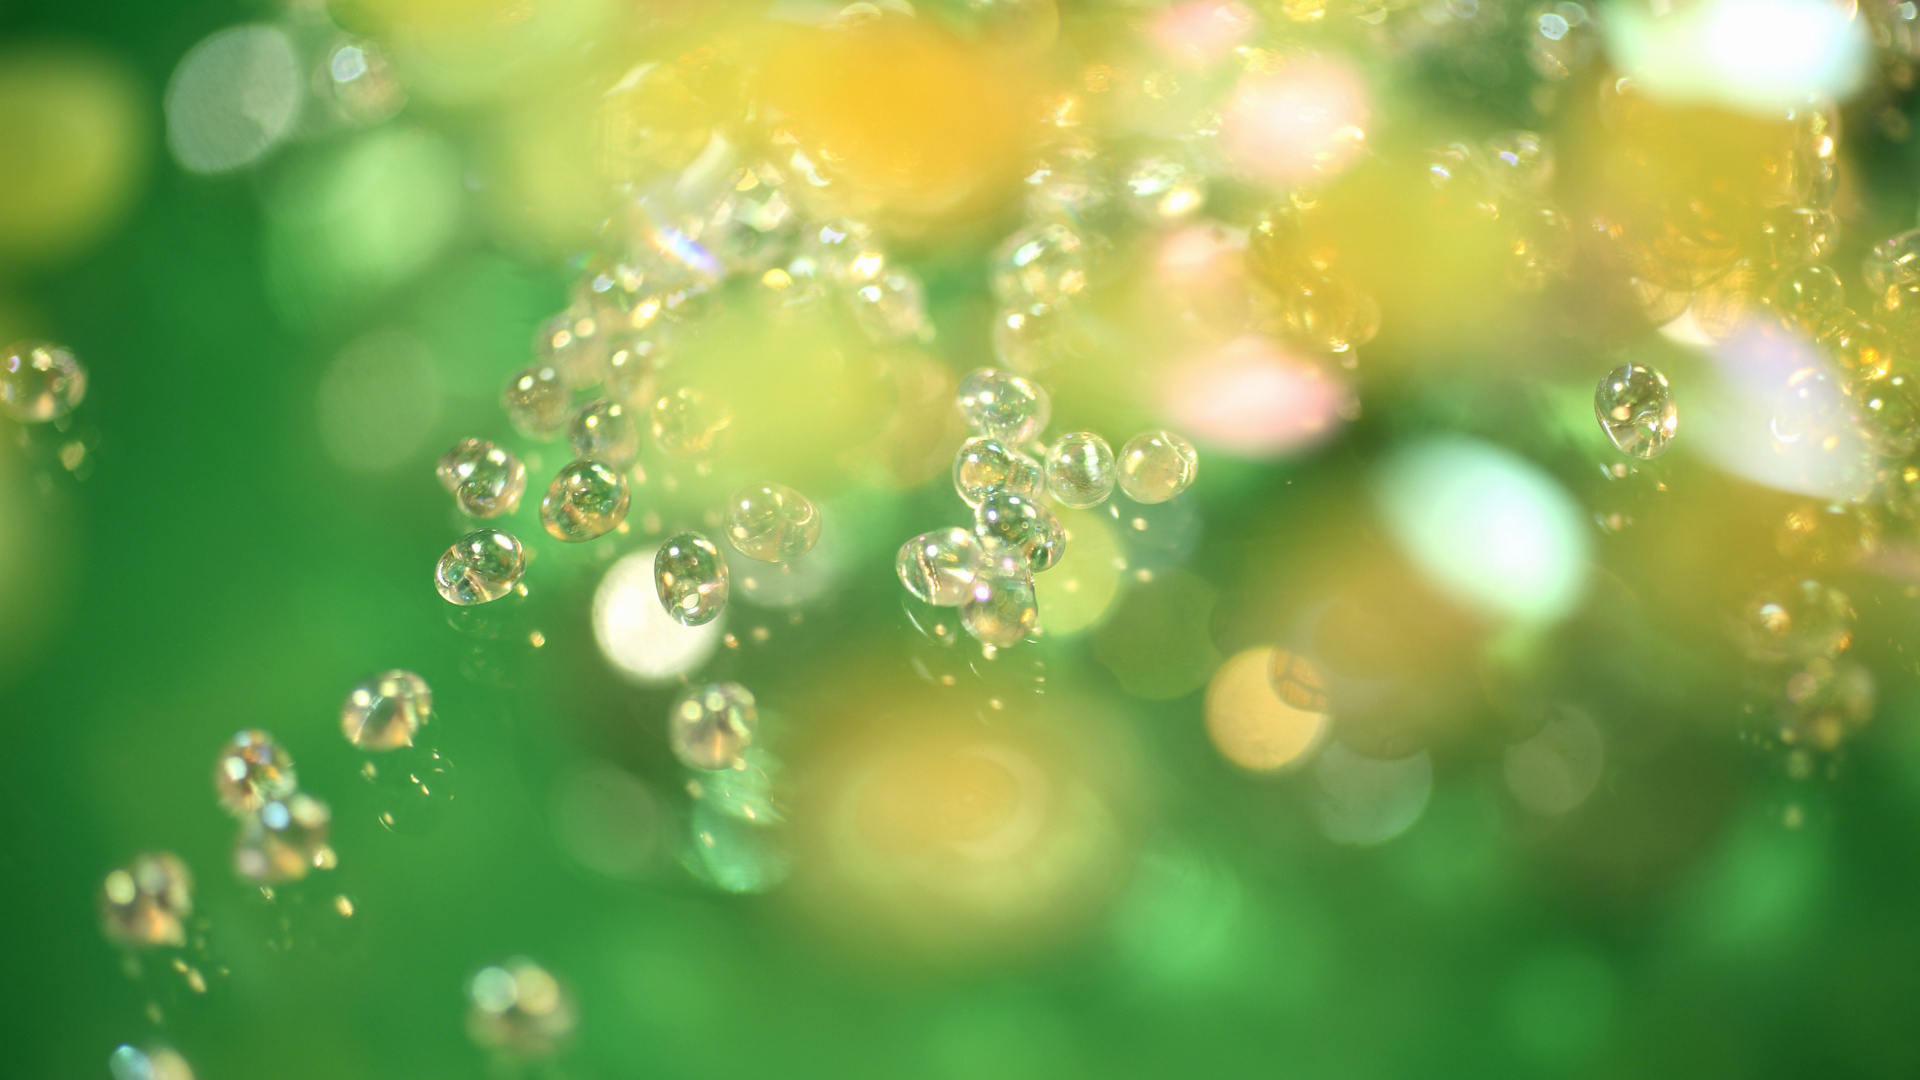 Water Droplets on Green Surface. Wallpaper in 1920x1080 Resolution